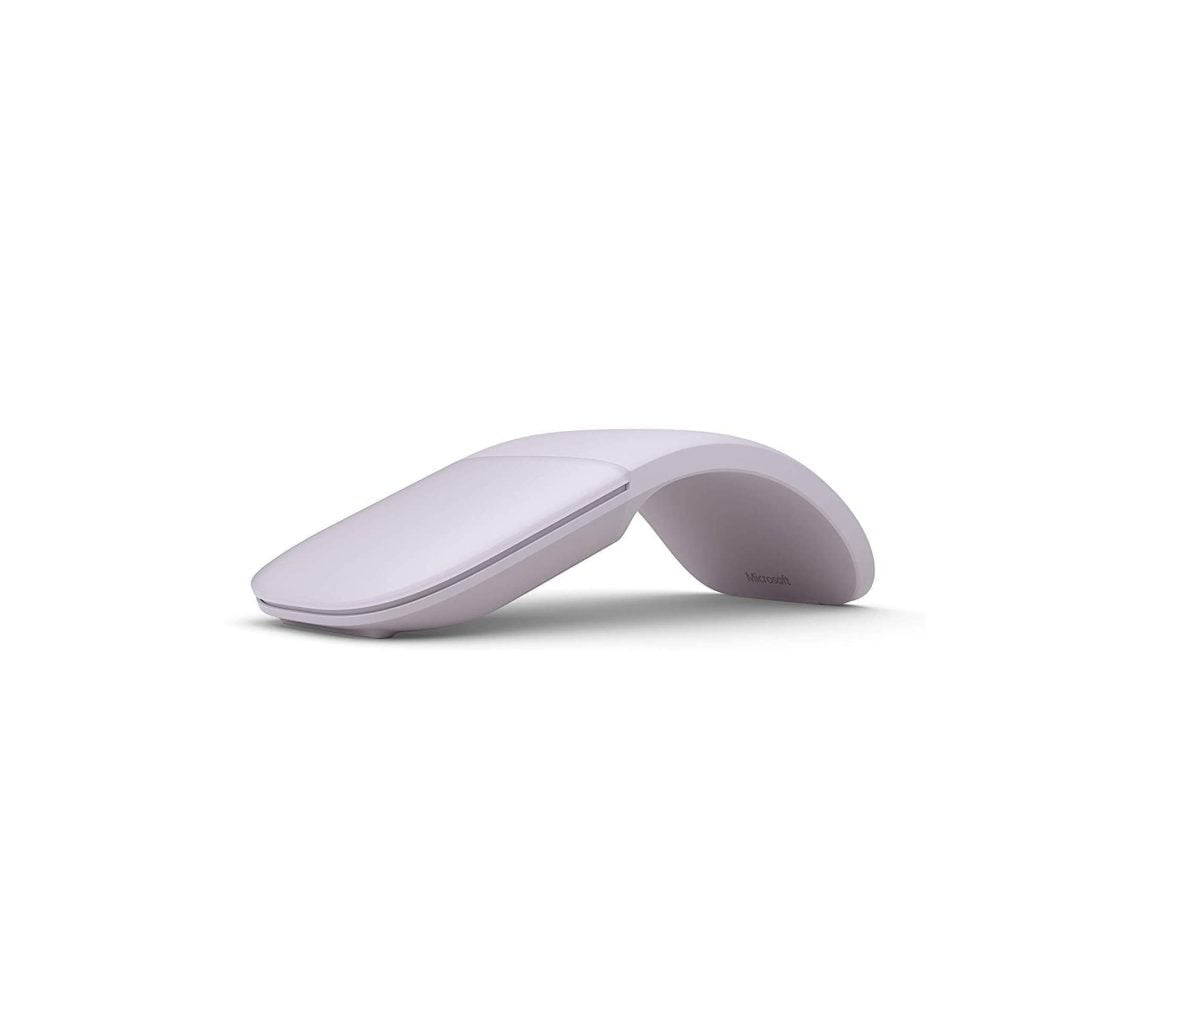 51Kghxwxwbl. Ac Sl1500 Microsoft Precise Control, Seamless Scrolling And Exceptional Accuracy In A Variety Of Form Factors, From The Ergonomic Comfort Of The Surface Precision Mouse To The Ultra-Slim Flexible Portability Of Surface Arc Mouse. Surface Arc Mouse Surface Arc Mouse - Lilac